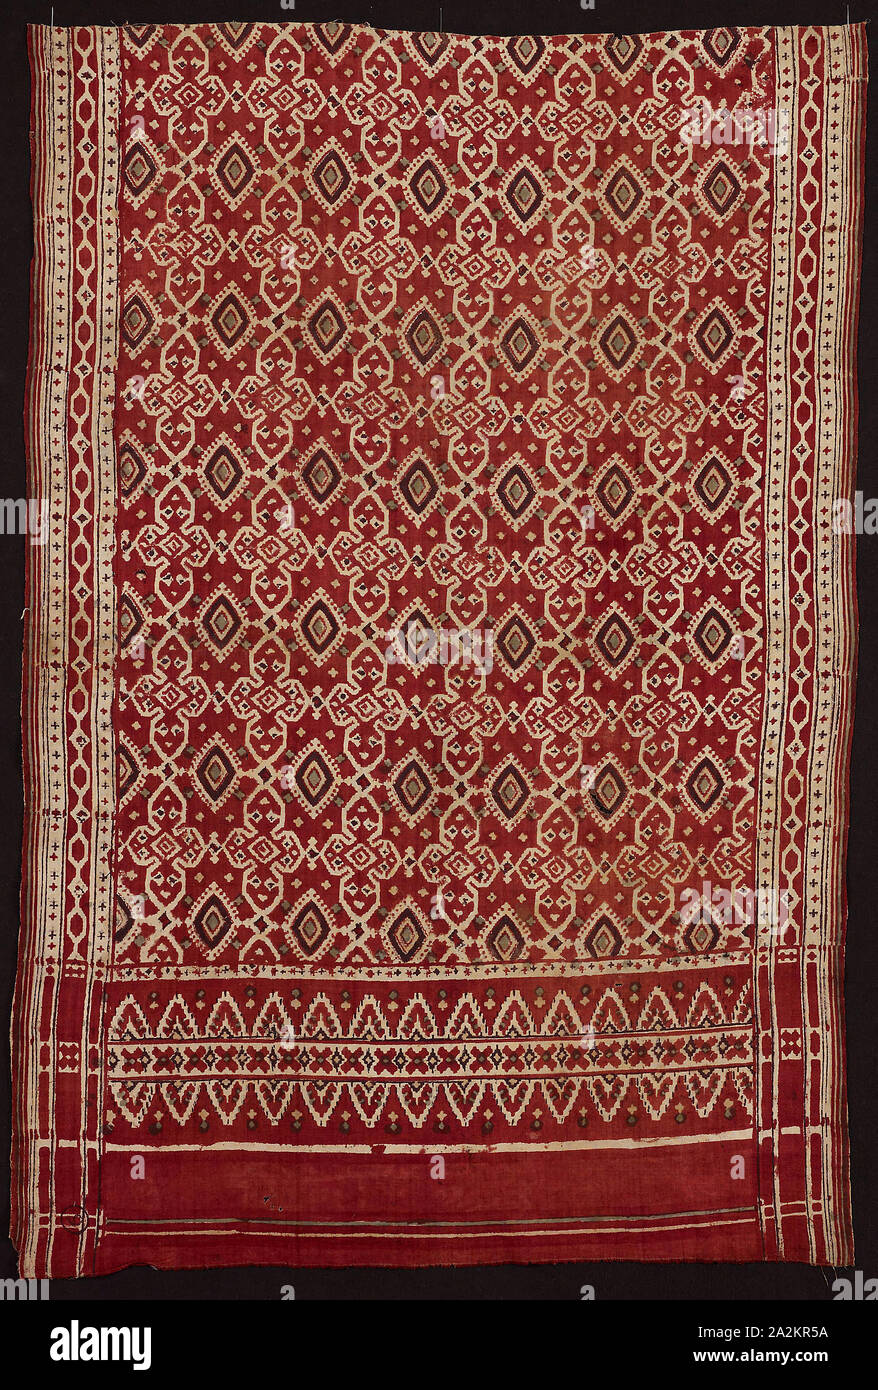 Heirloom Textile (sarasa), 18th century, India, Gujarat, India, Cotton, plain weave, block-printed mordant and resist-dyed, painted, 146 x 97.9 cm (57 1/2 x 38 1/2 in Stock Photo